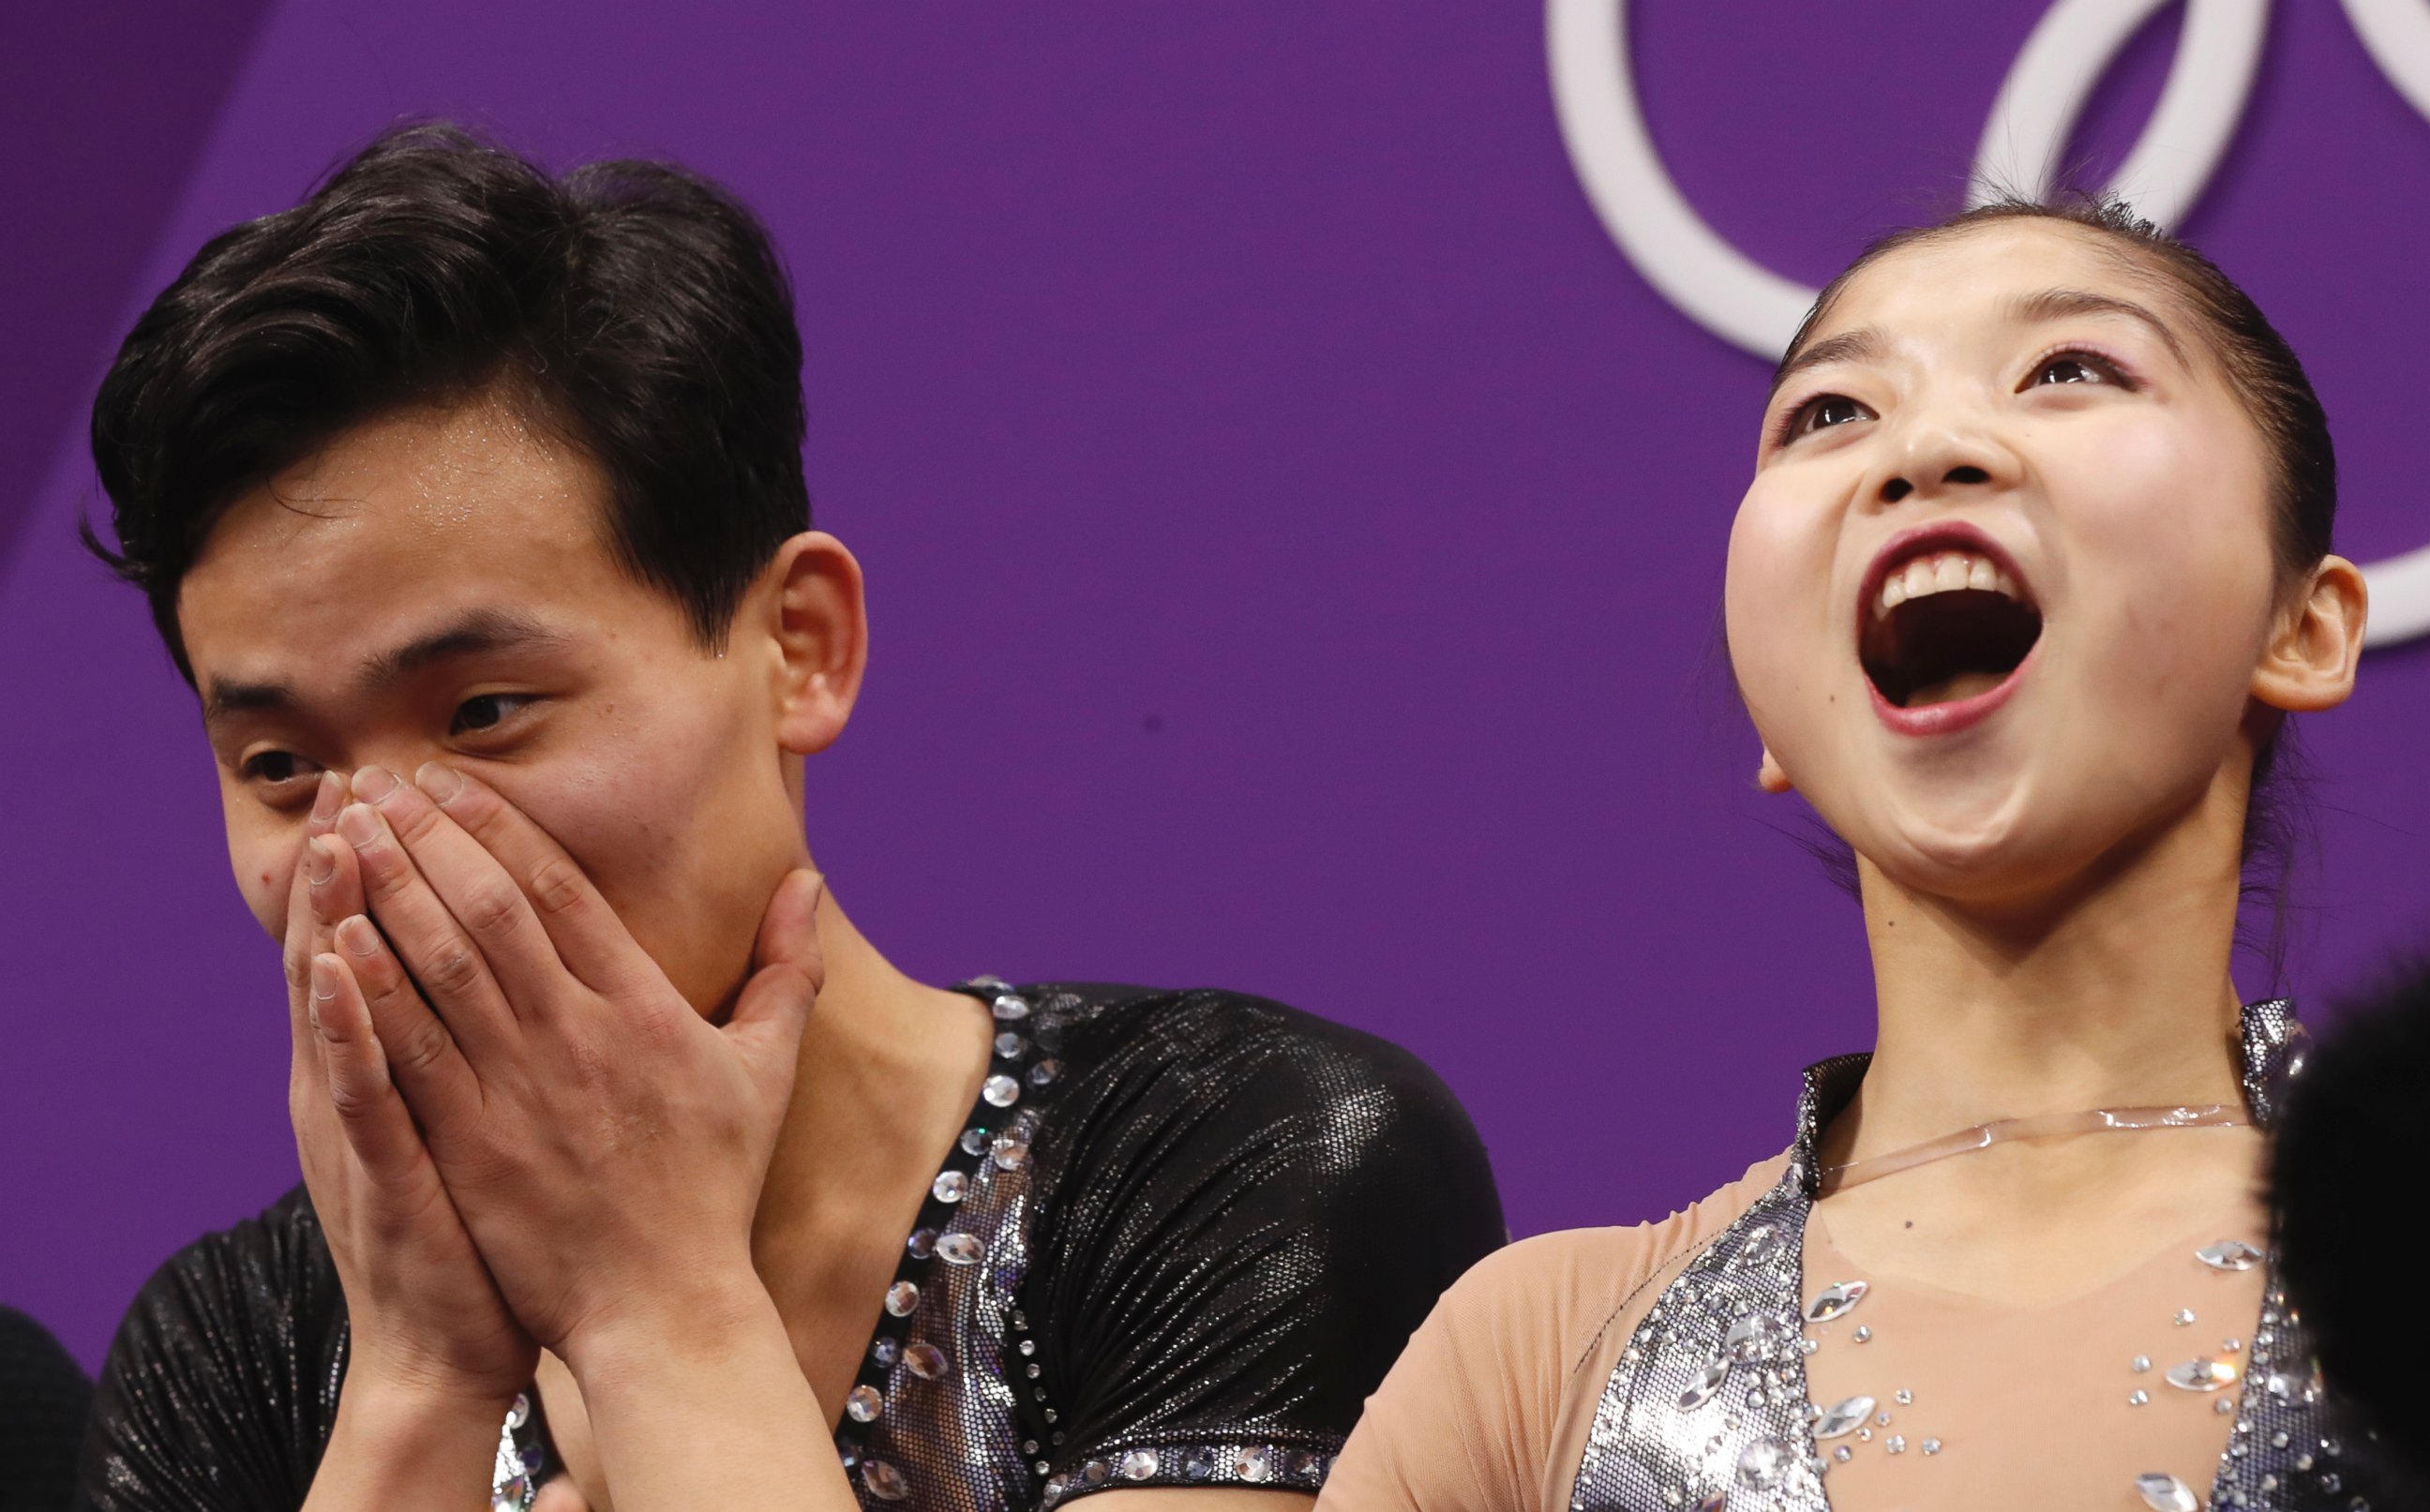 Ryom Tae Ok and Kim Ju Sik of North Korea react after their scores are posted following their performance in the pair figure skating short program in the Gangneung Ice Arena at the 2018 Winter Olympics in Gangneung, South Korea, Wednesday, Feb. 14, 2018.